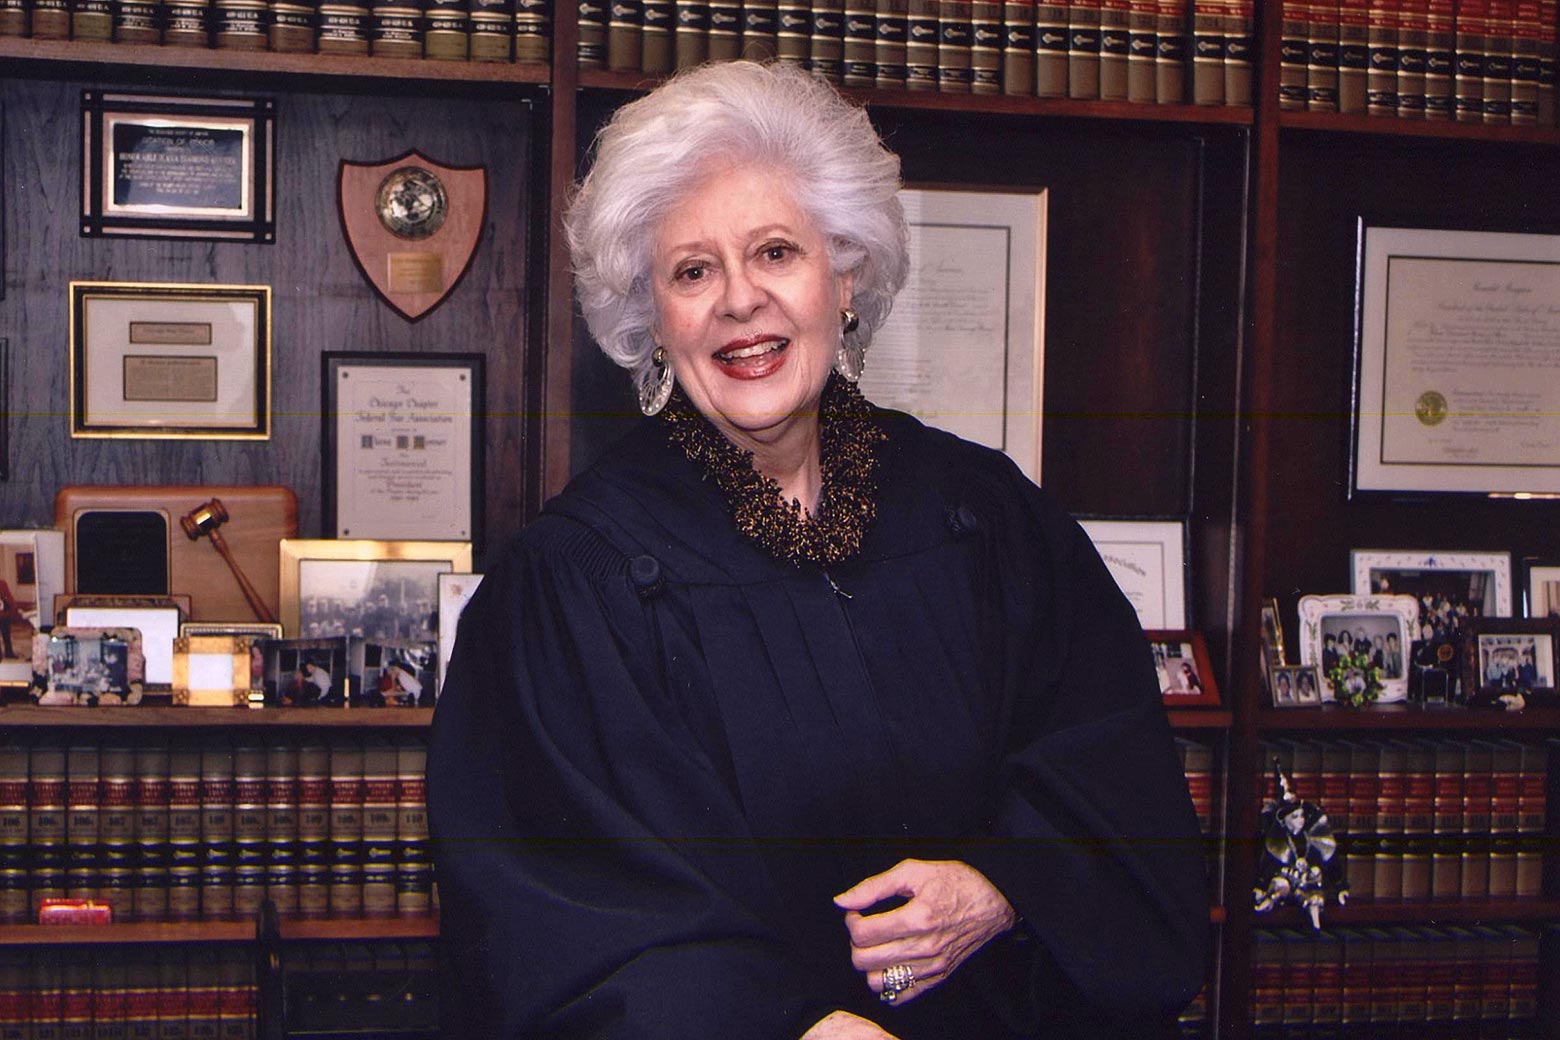 Judge Rovner stands in front of a bookcase with legal books and a gavel and wears her judicial robe, large earrings, and a smile.